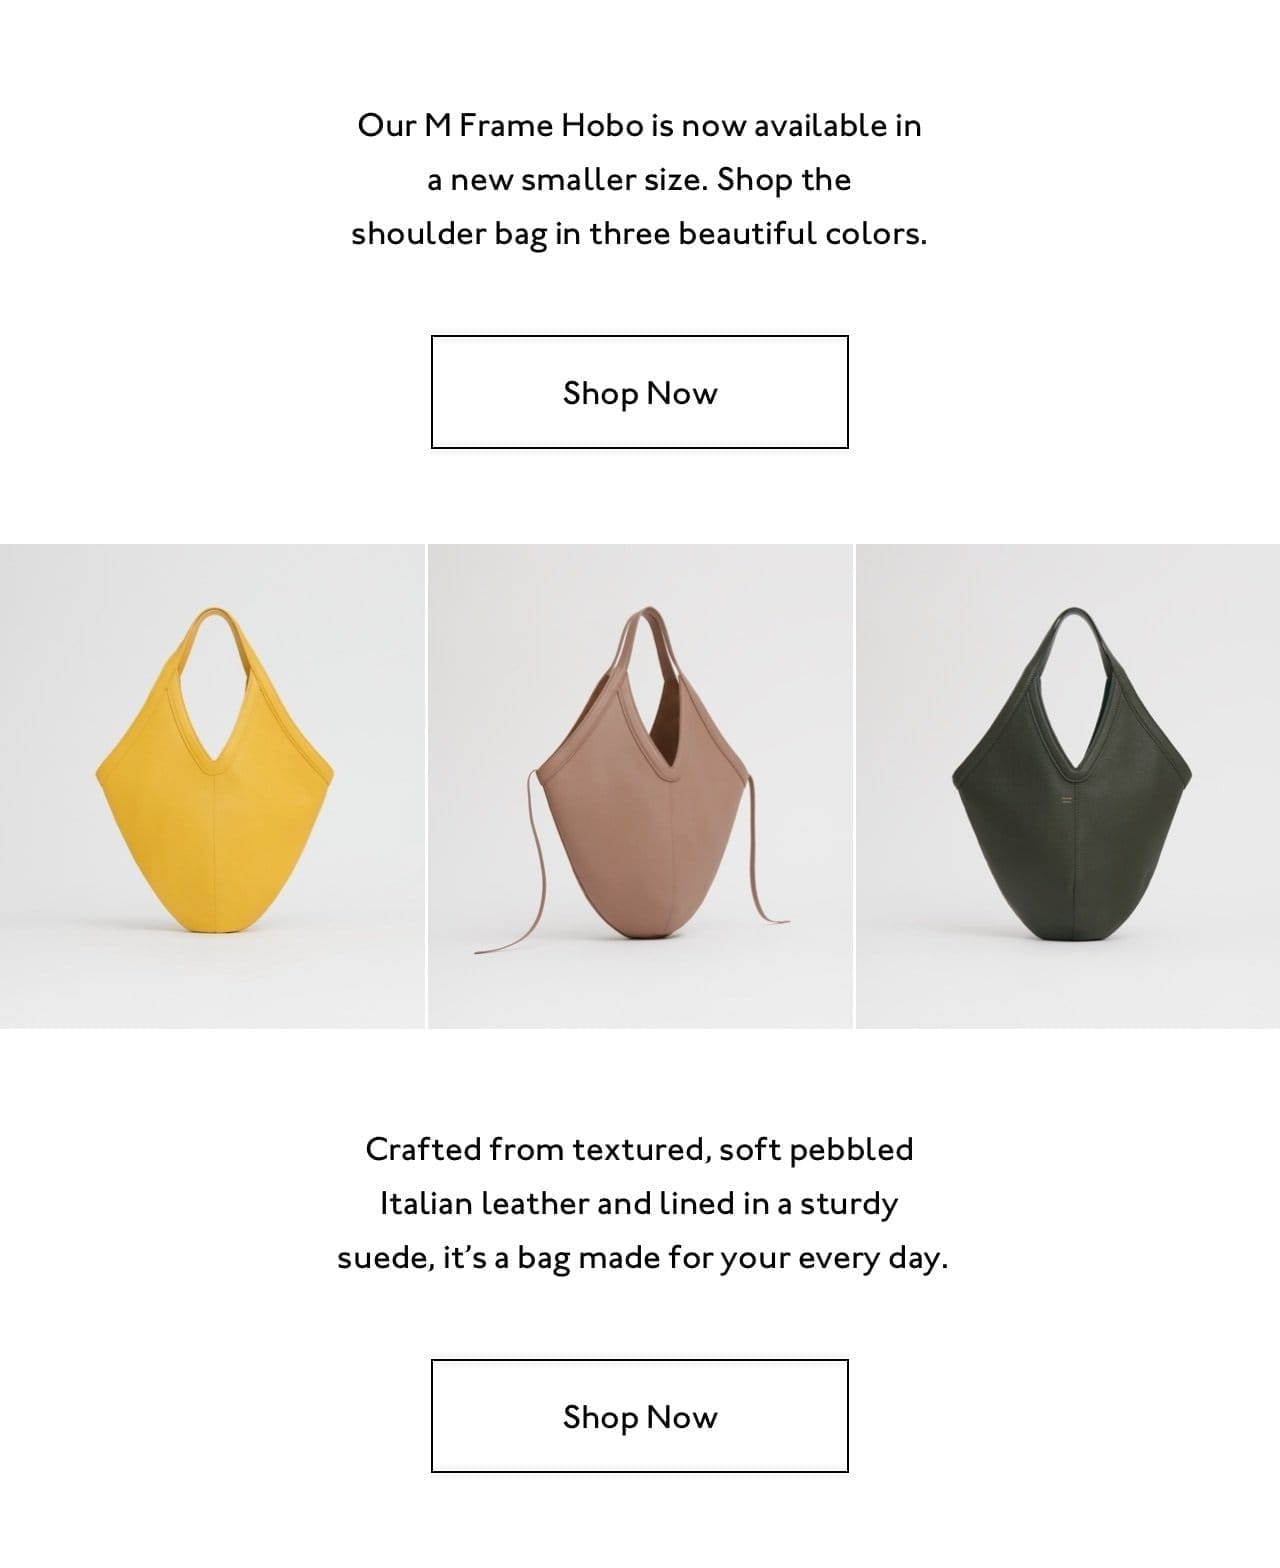 Our M Frame Hobo is now available in a new smaller size. Shop the shoulder bag in three beautiful colors.